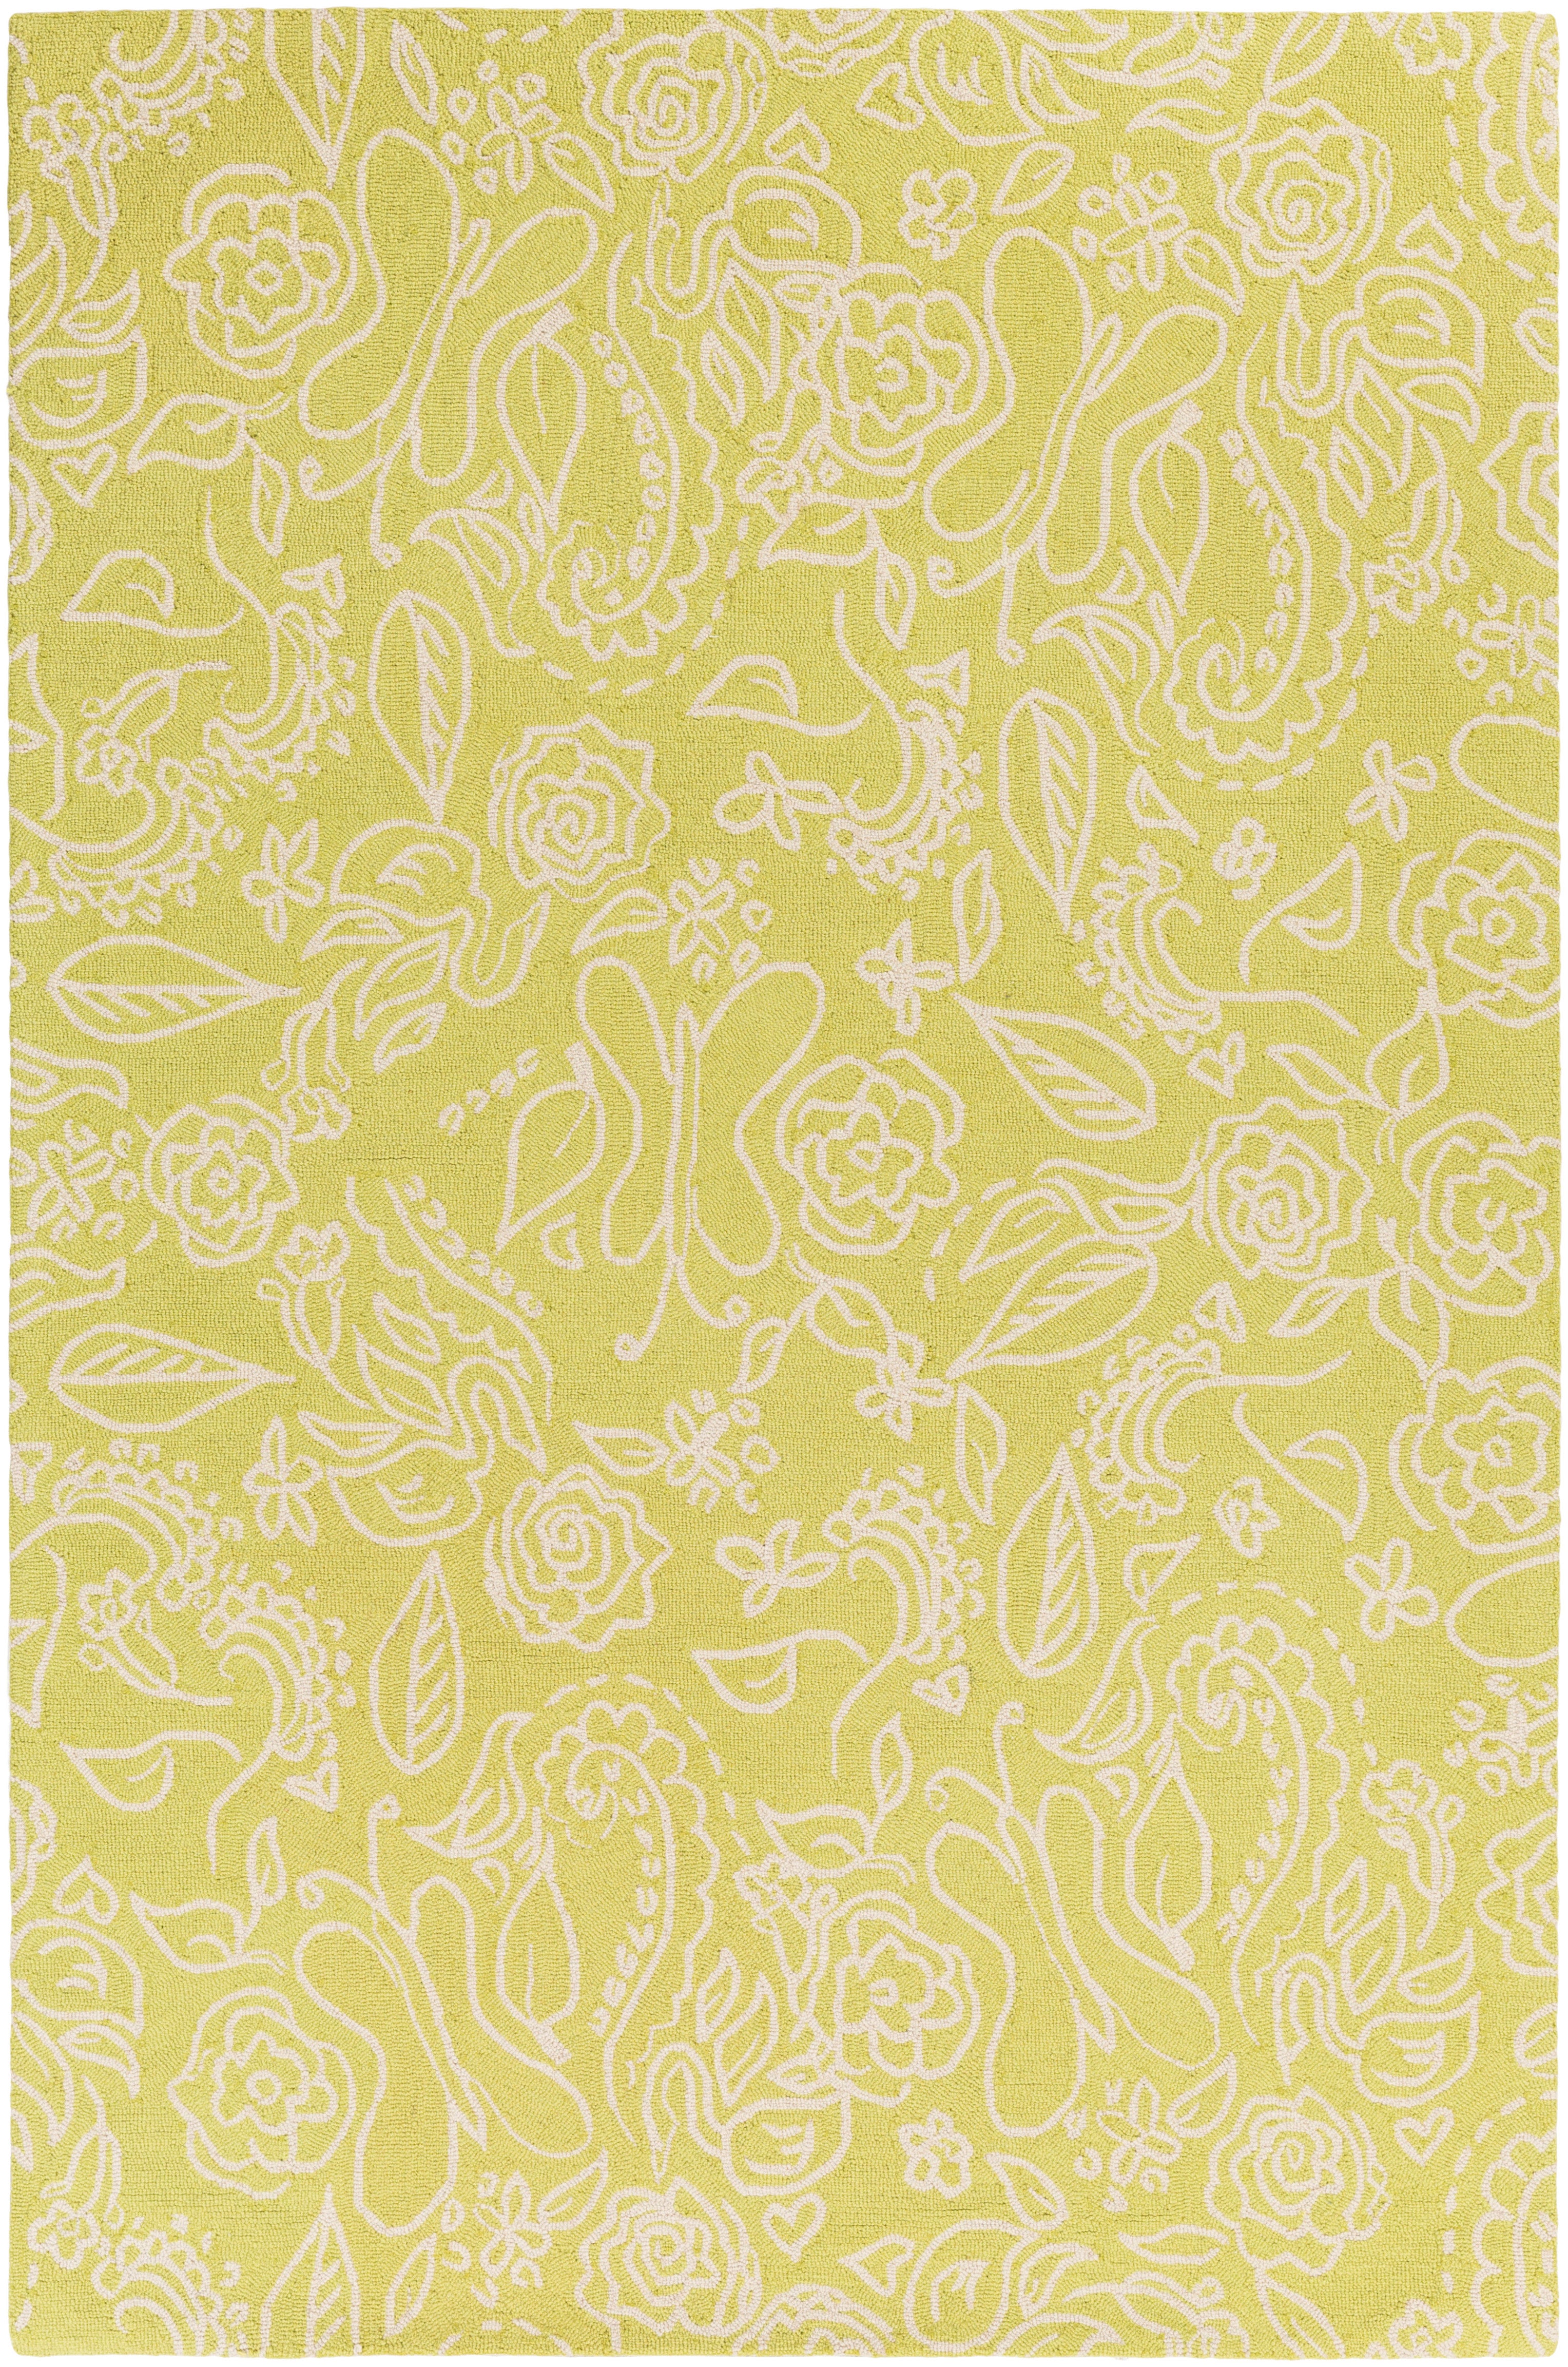 Surya Tic Tac Toe TCT6007 Green/Neutral Floral and Paisley Area Rug